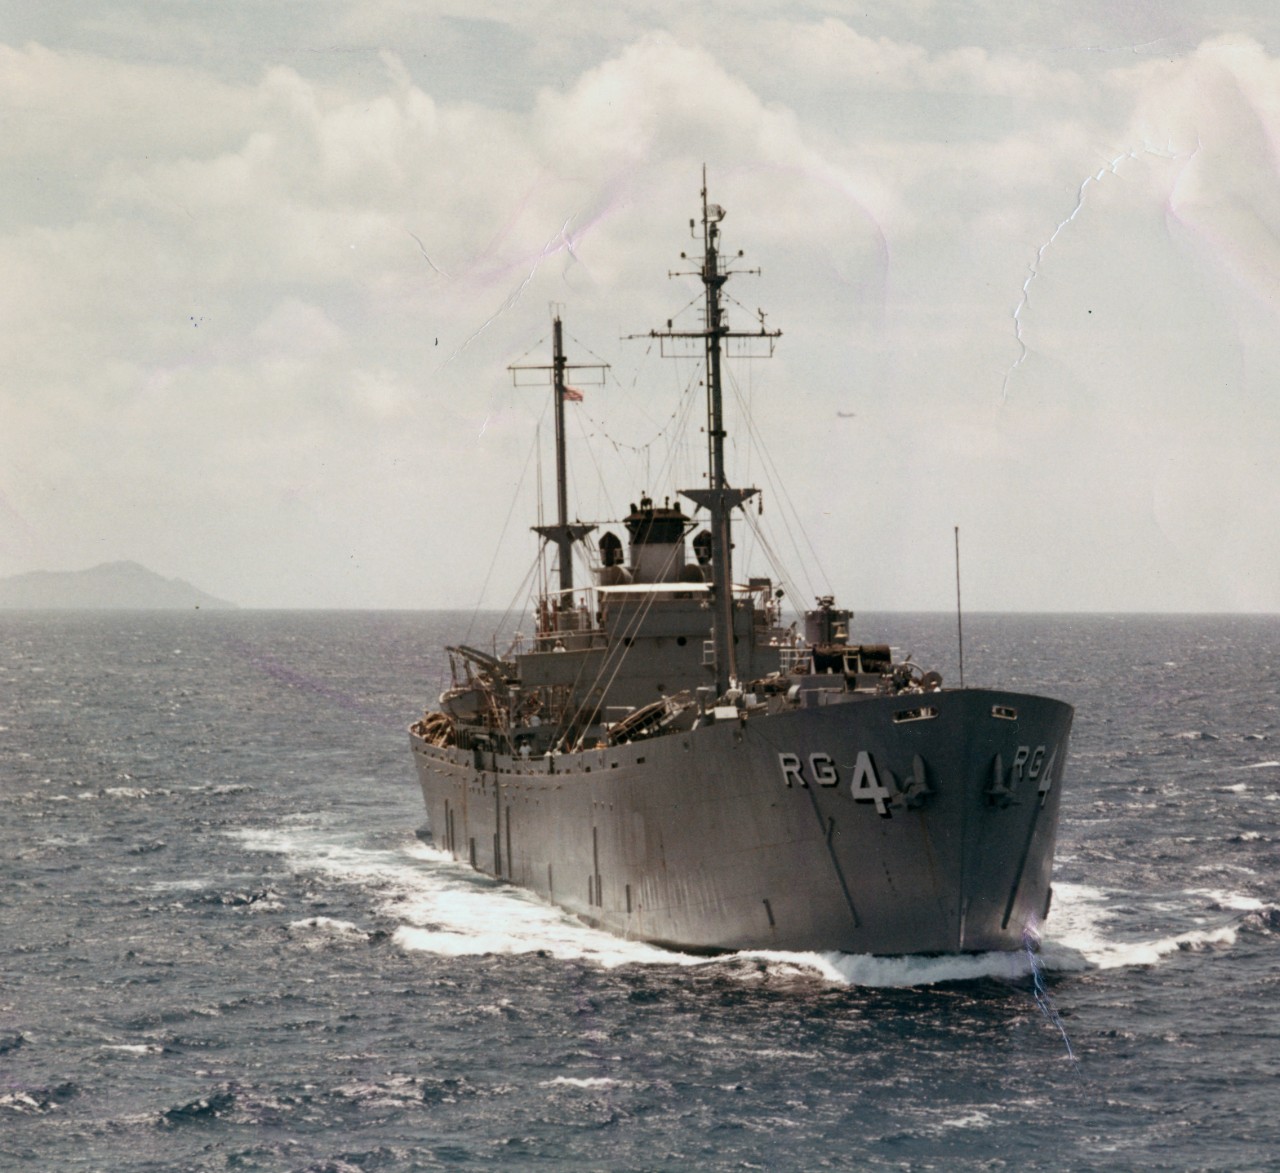 Bow view of internal combustion engine repair ship USS Tutuila (ARG-4) underway